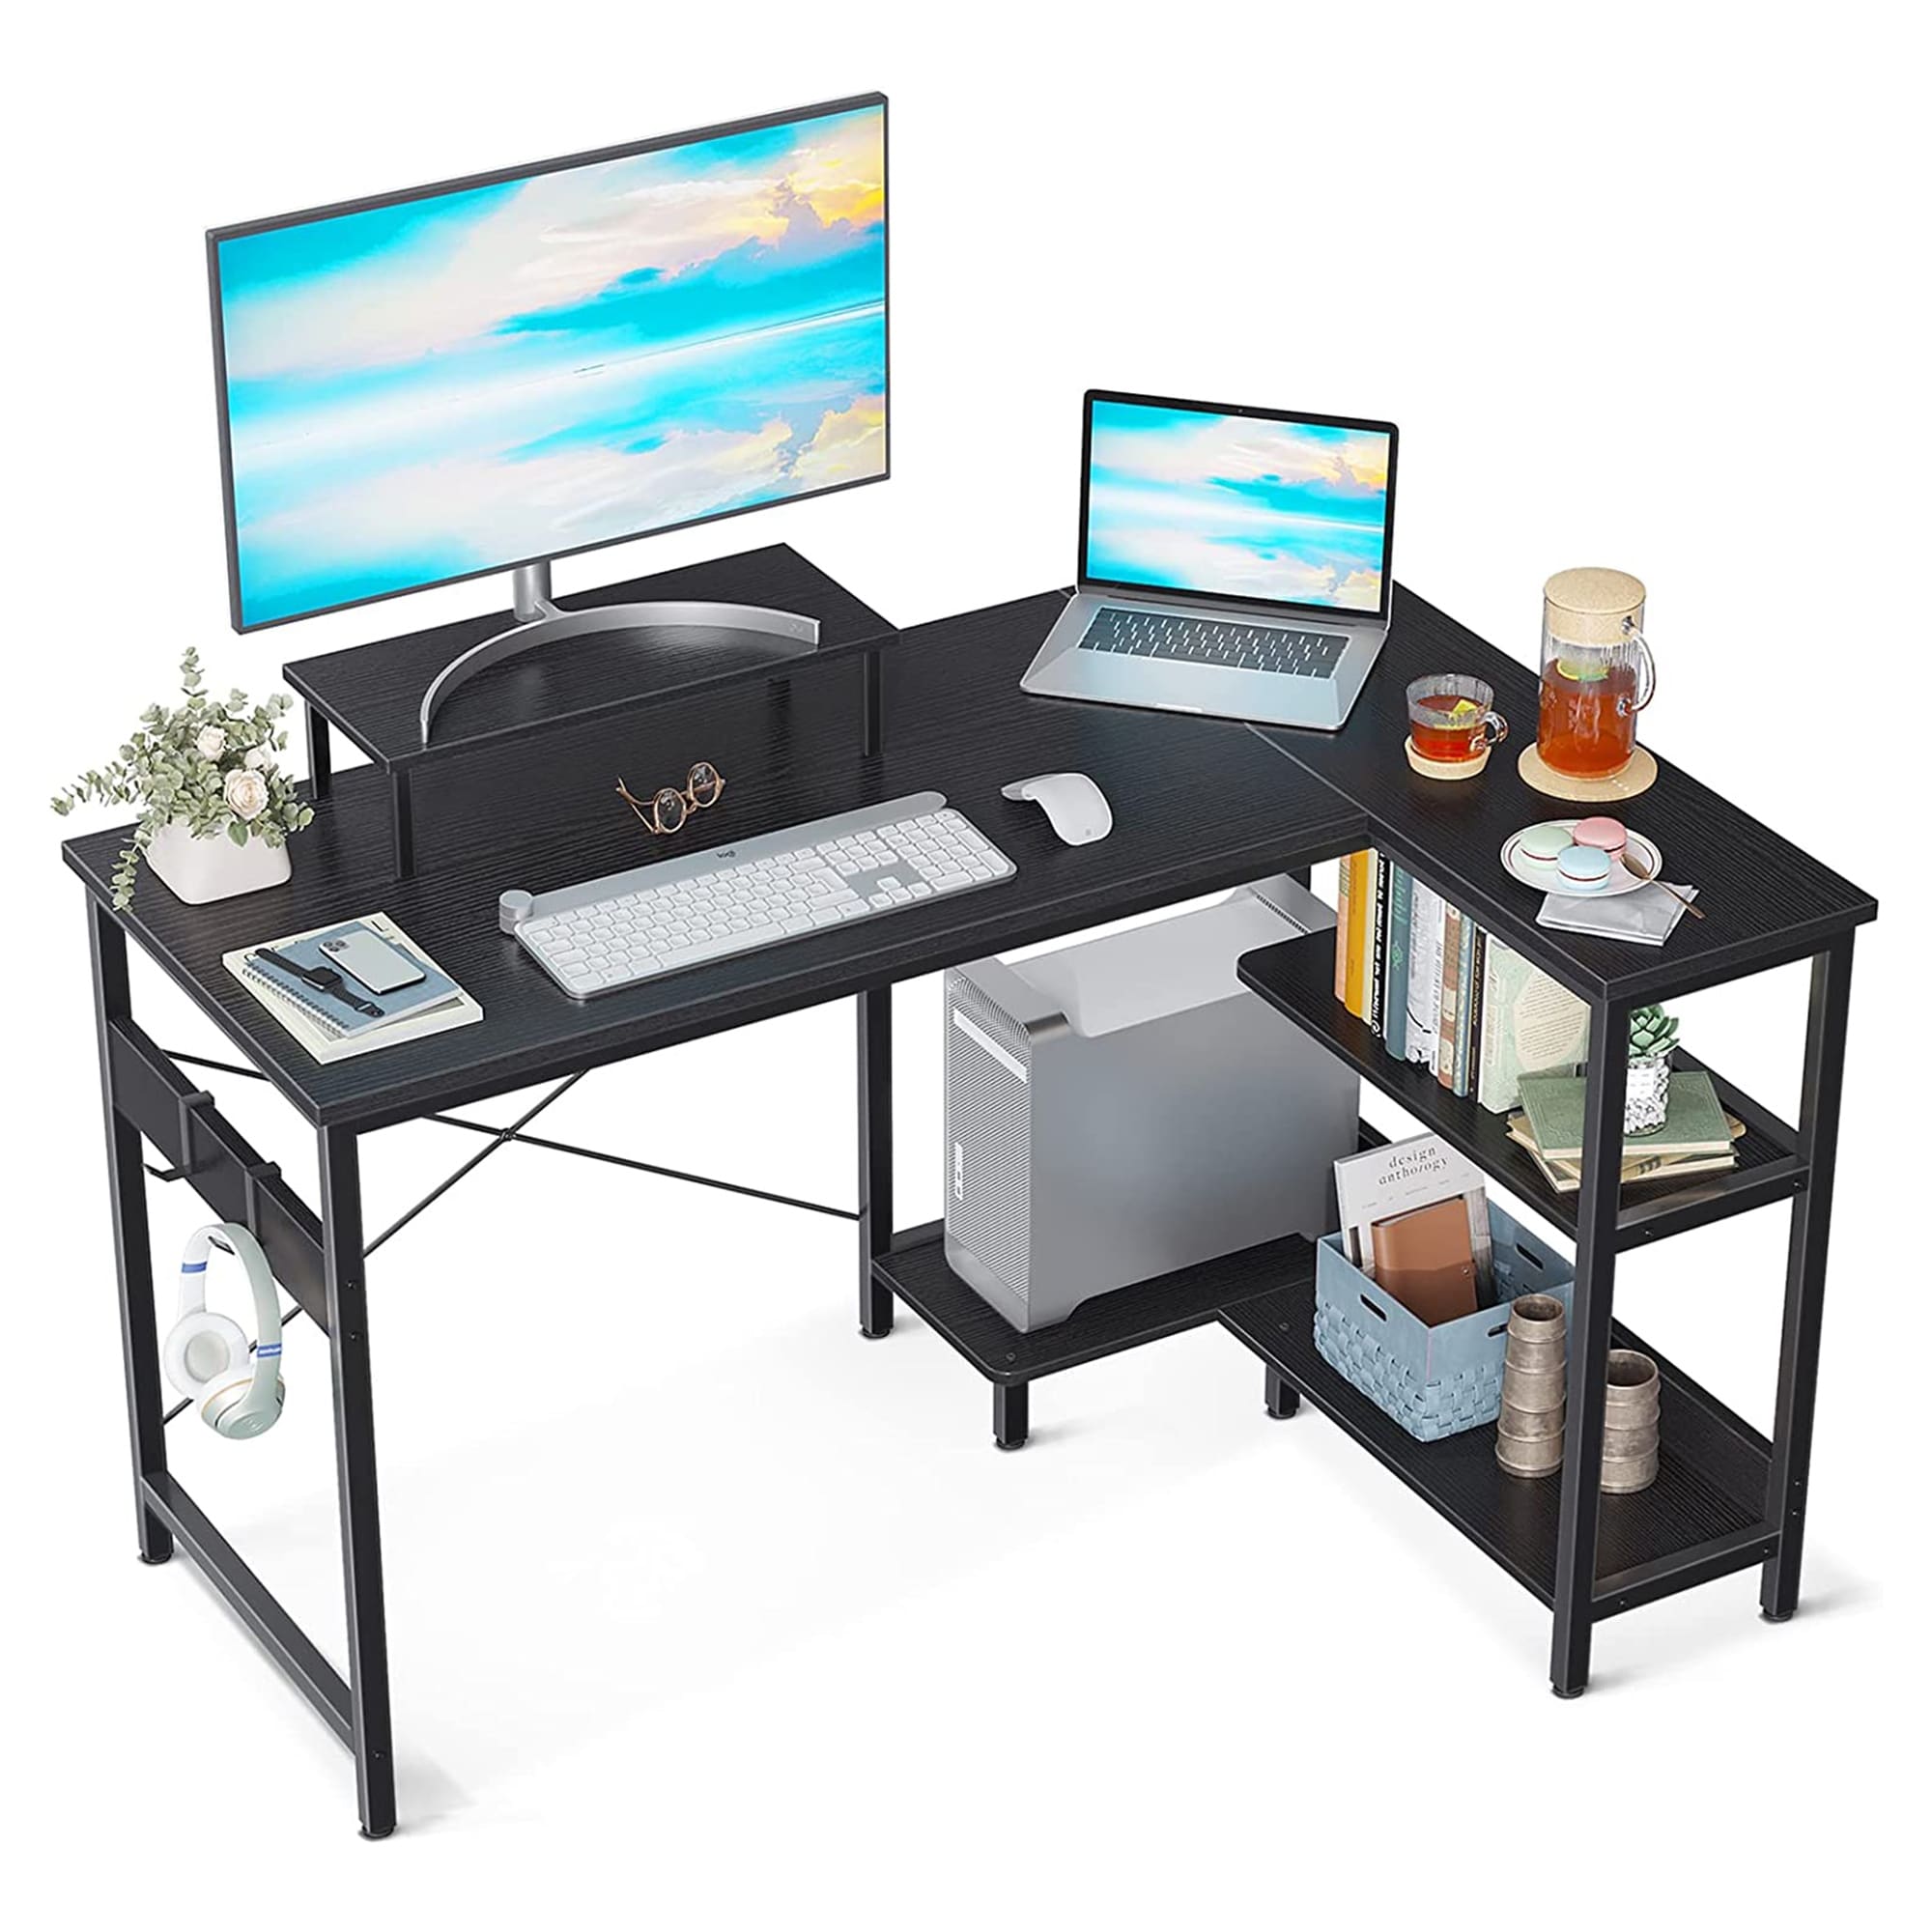 ODK Computer Desk with Keyboard Tray and Drawers, 48 inch Office